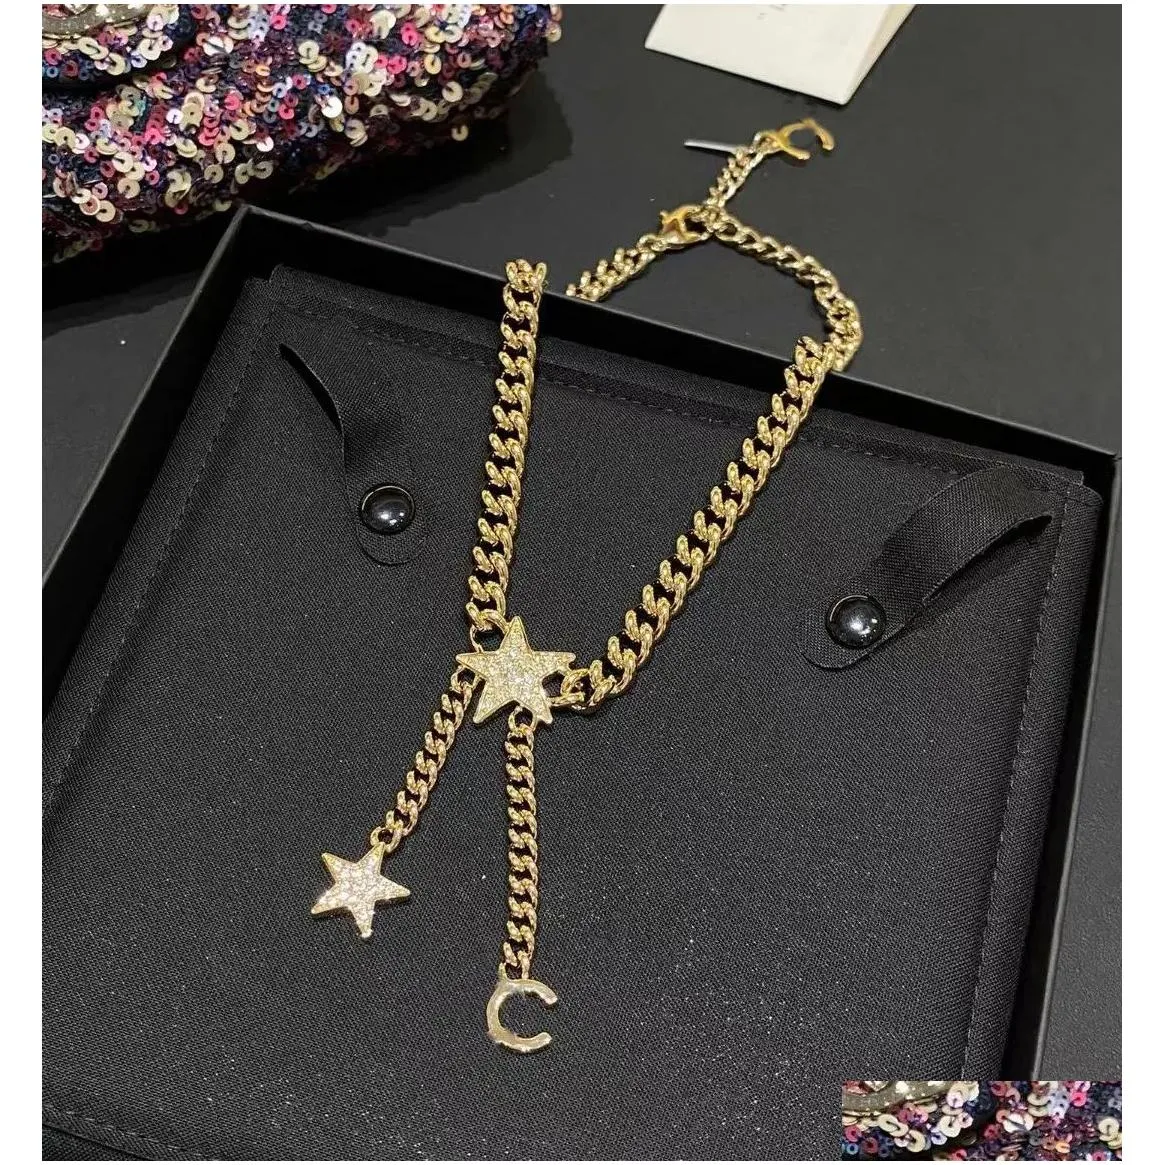 Charm 2023 Luxury Quality Charm Pendant Necklace With Diamond And Star Shape Chain Design In 18K Gold Plated Have Box Stamp Ps7400B D Dhbut